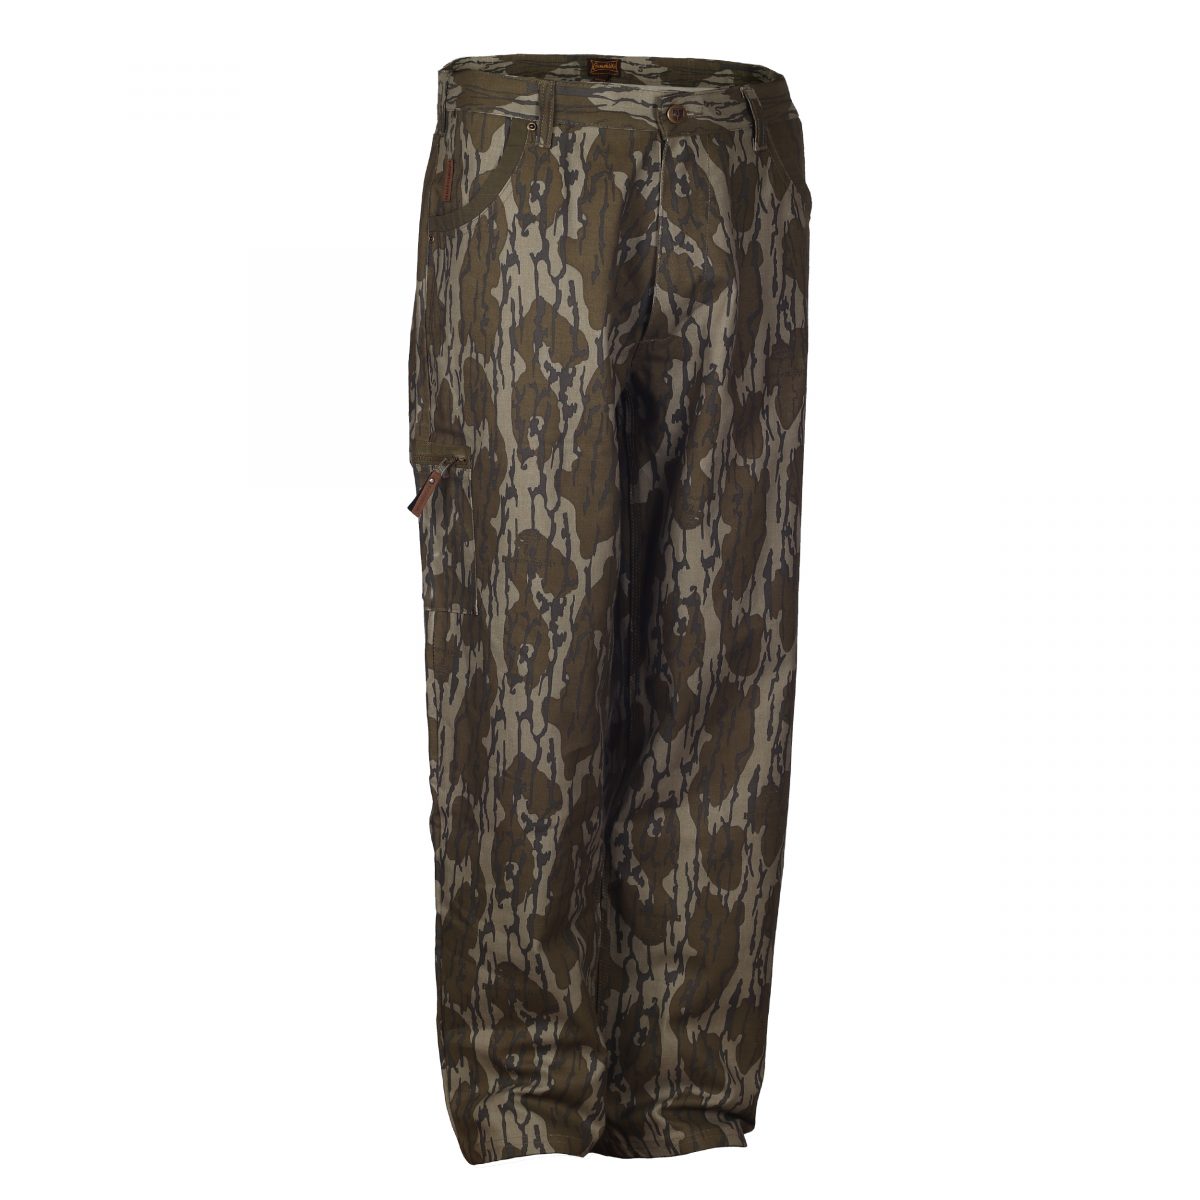 Gamekeeper CRP Pant-CAMO CLOTHING-Kevin's Fine Outdoor Gear & Apparel